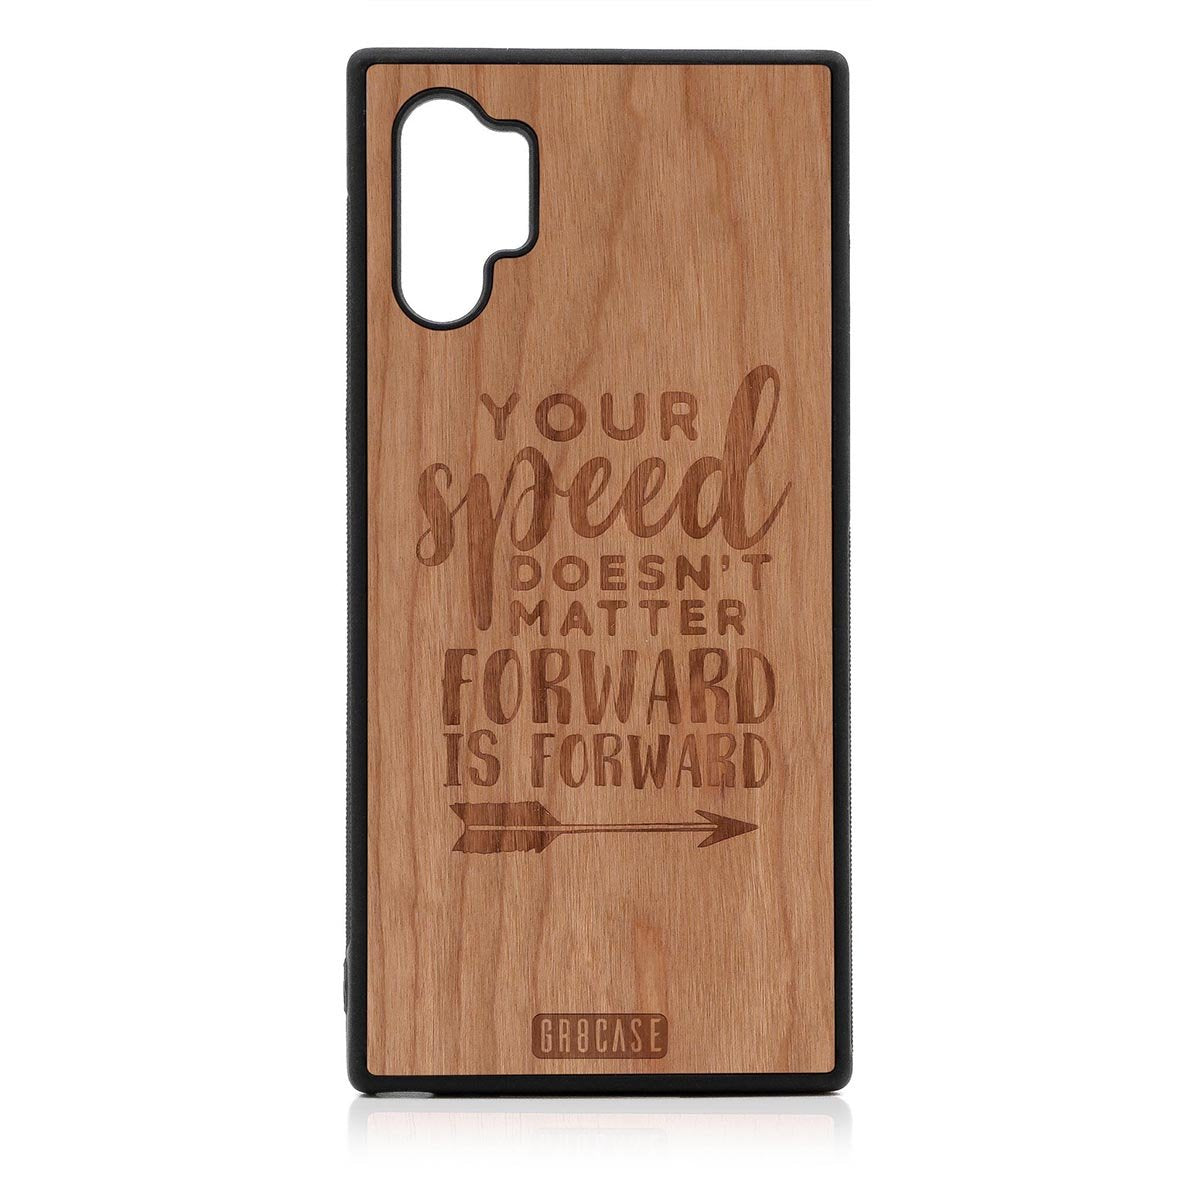 Your Speed Doesn't Matter Forward Is Forward Design Wood Case Samsung Galaxy Note 10 Plus